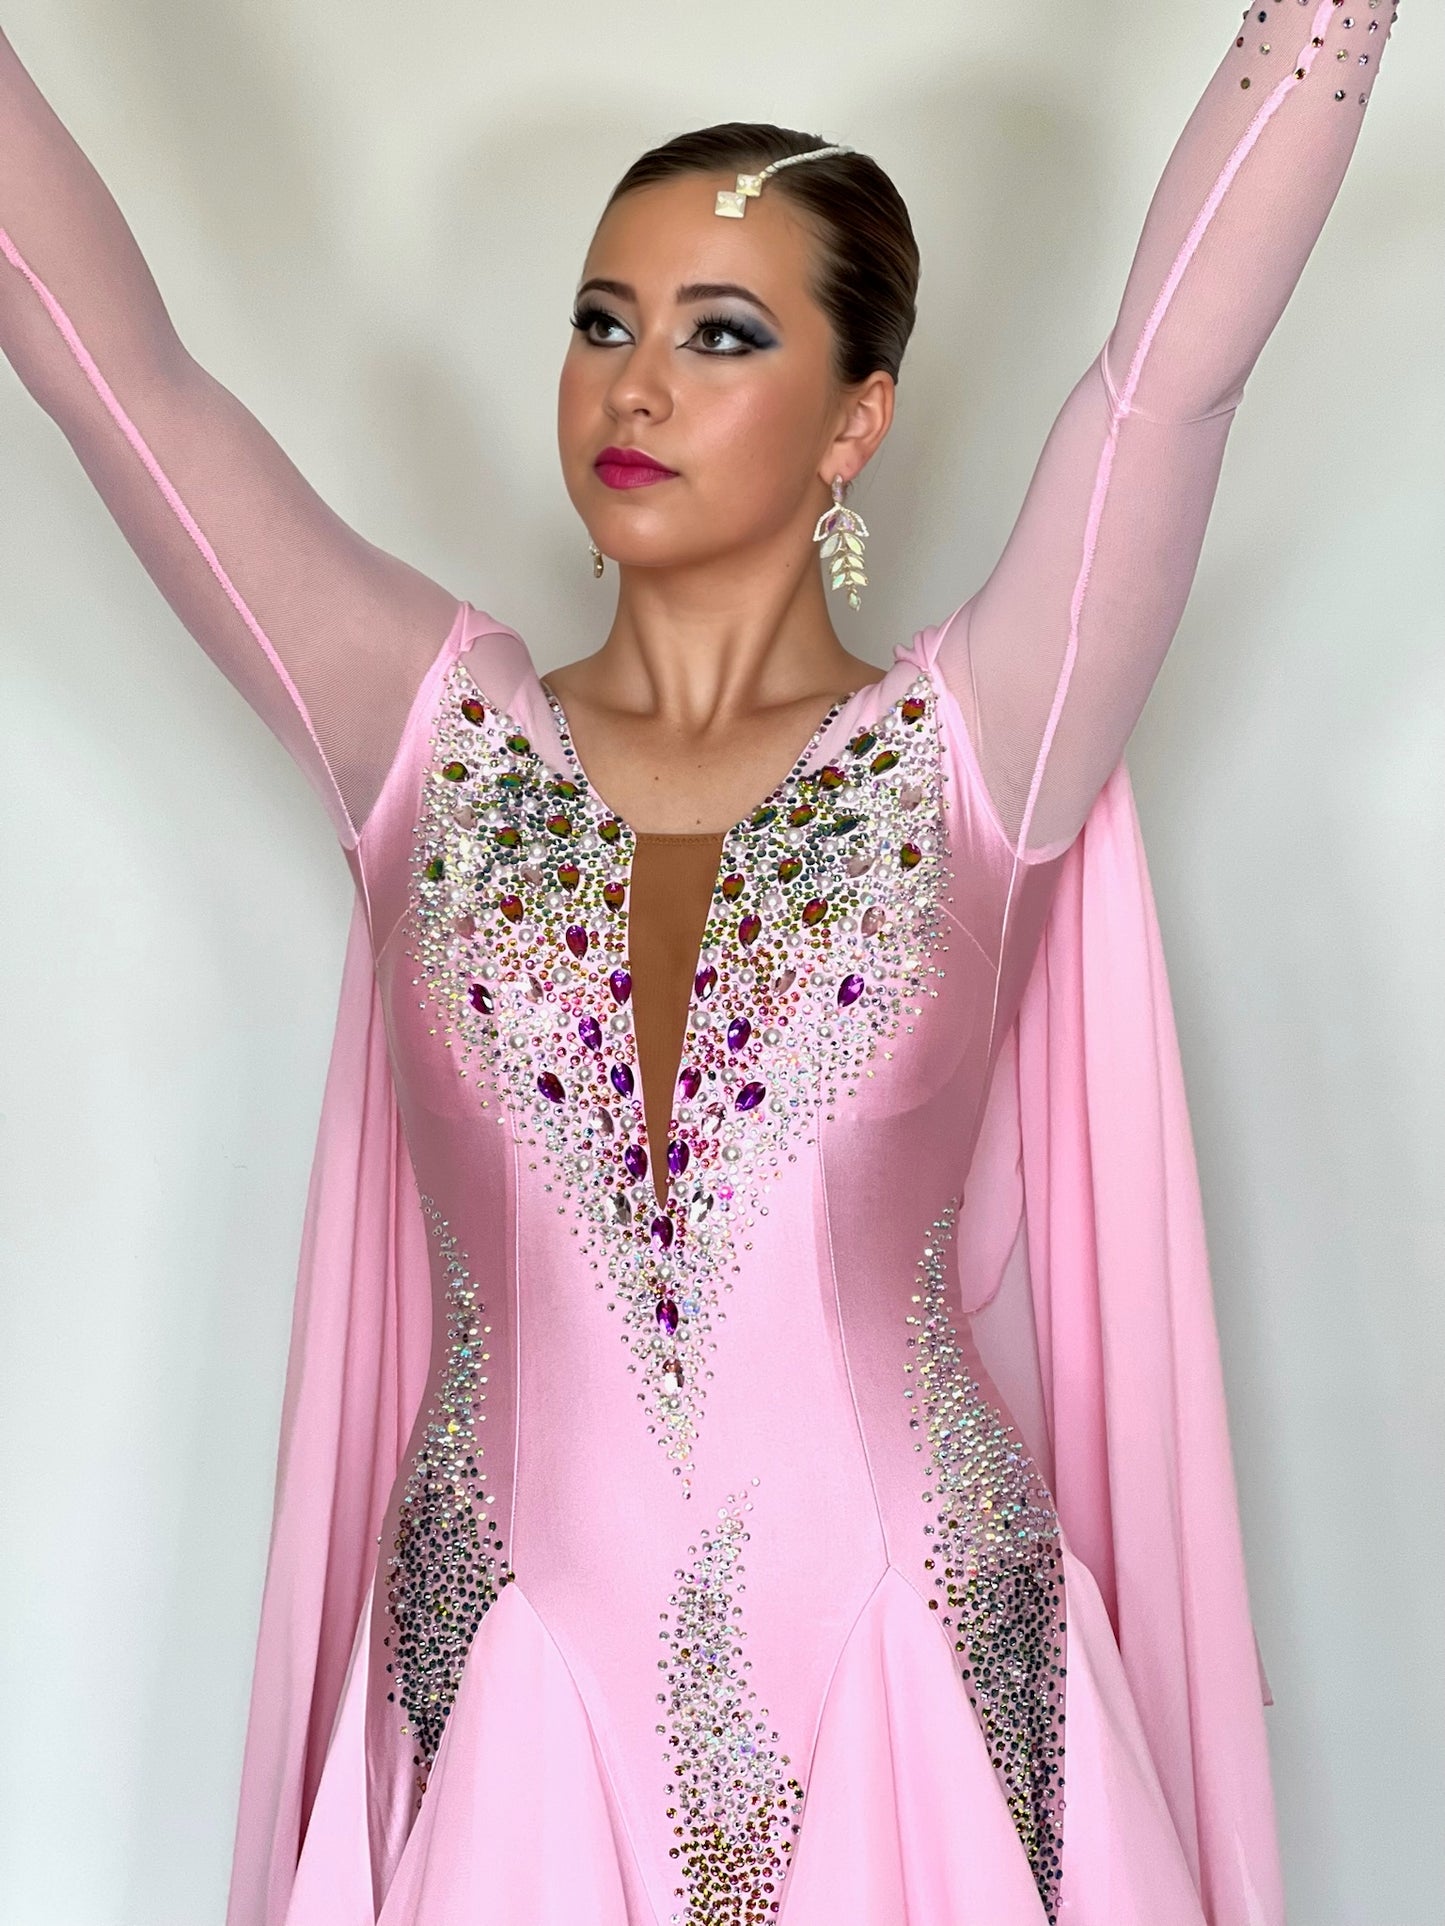 131 Pink Ballroom Dress with shoulder floats. Tan panel to the chest area giving a plunging neckline effect. Decorated in AB & Fuchsia stones